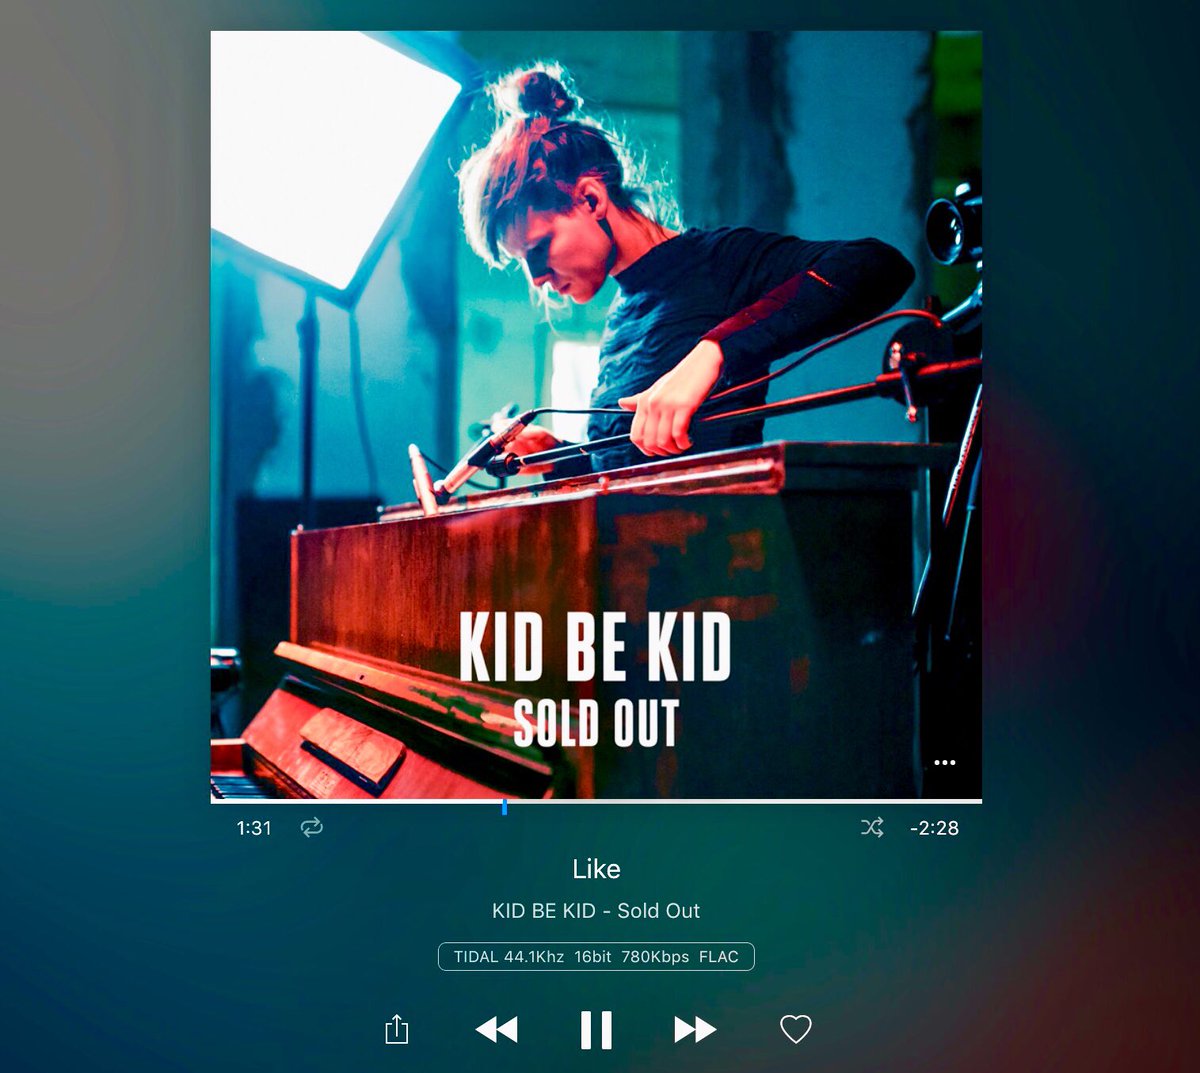 Coincidentally found this great #soulful #record - „Sold Out“ by Kid Be Kid - spontaneously thinking of Alicia Keys - in the most positive way - however not imitating her! Beatboxing, piano playing and singing, all by one woman at the same time ... simply #awesome !!@SPRINGSTOFF